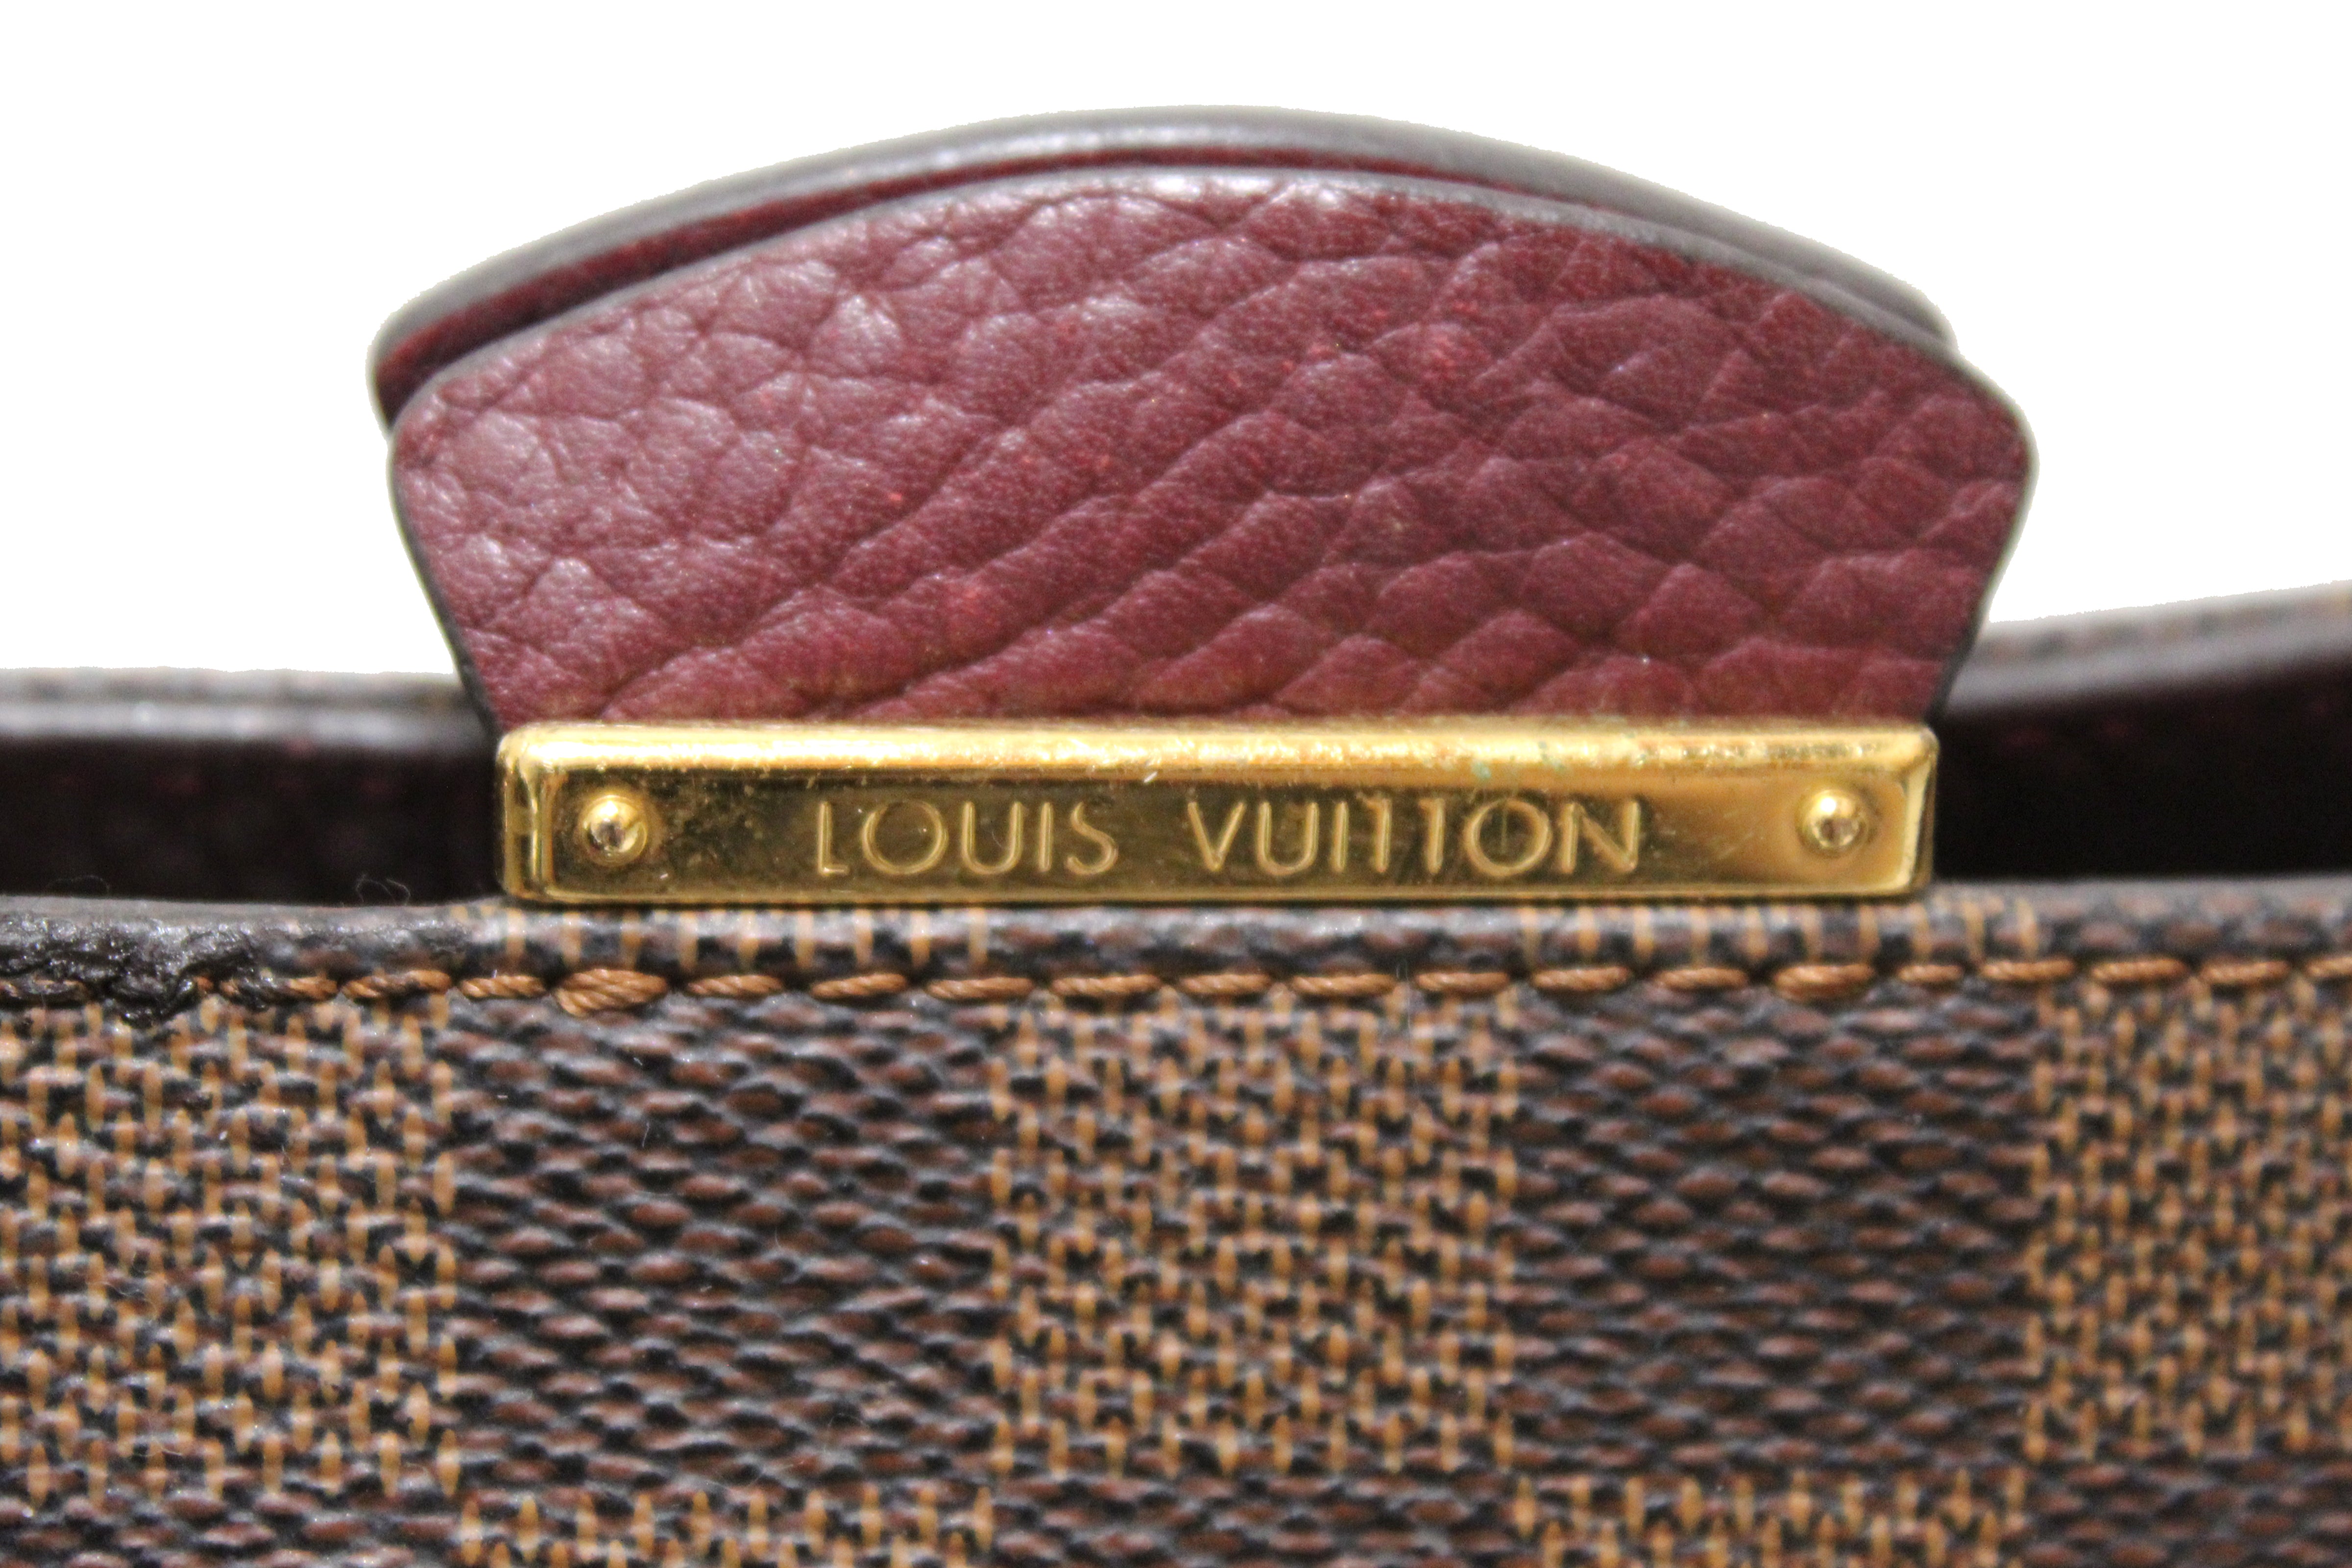 Authentic Louis Vuitton Damier Ebene Canvas with Burgandy Leather Brittany Bag